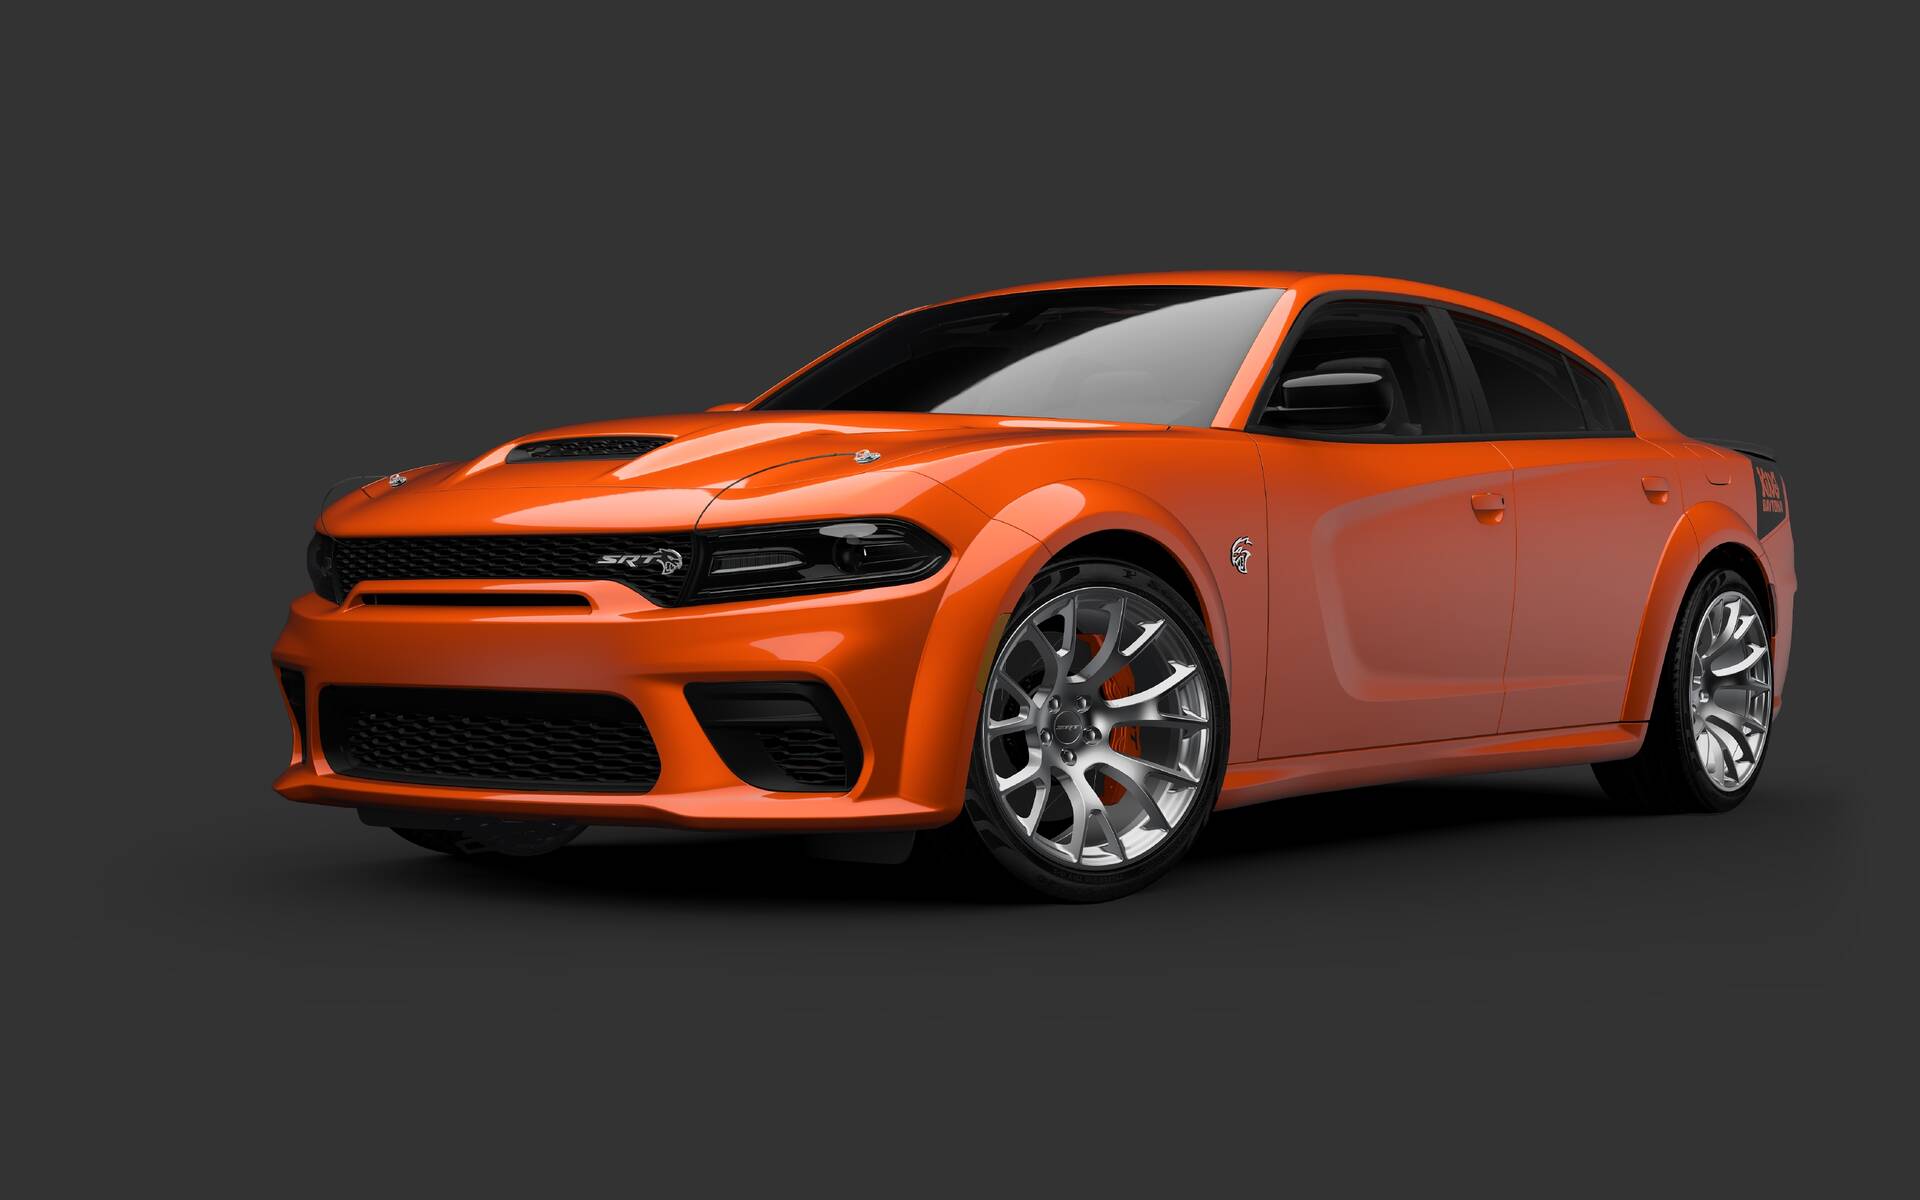 The Dodge Charger Daytona SRT is a Charged Up Electric Prototype